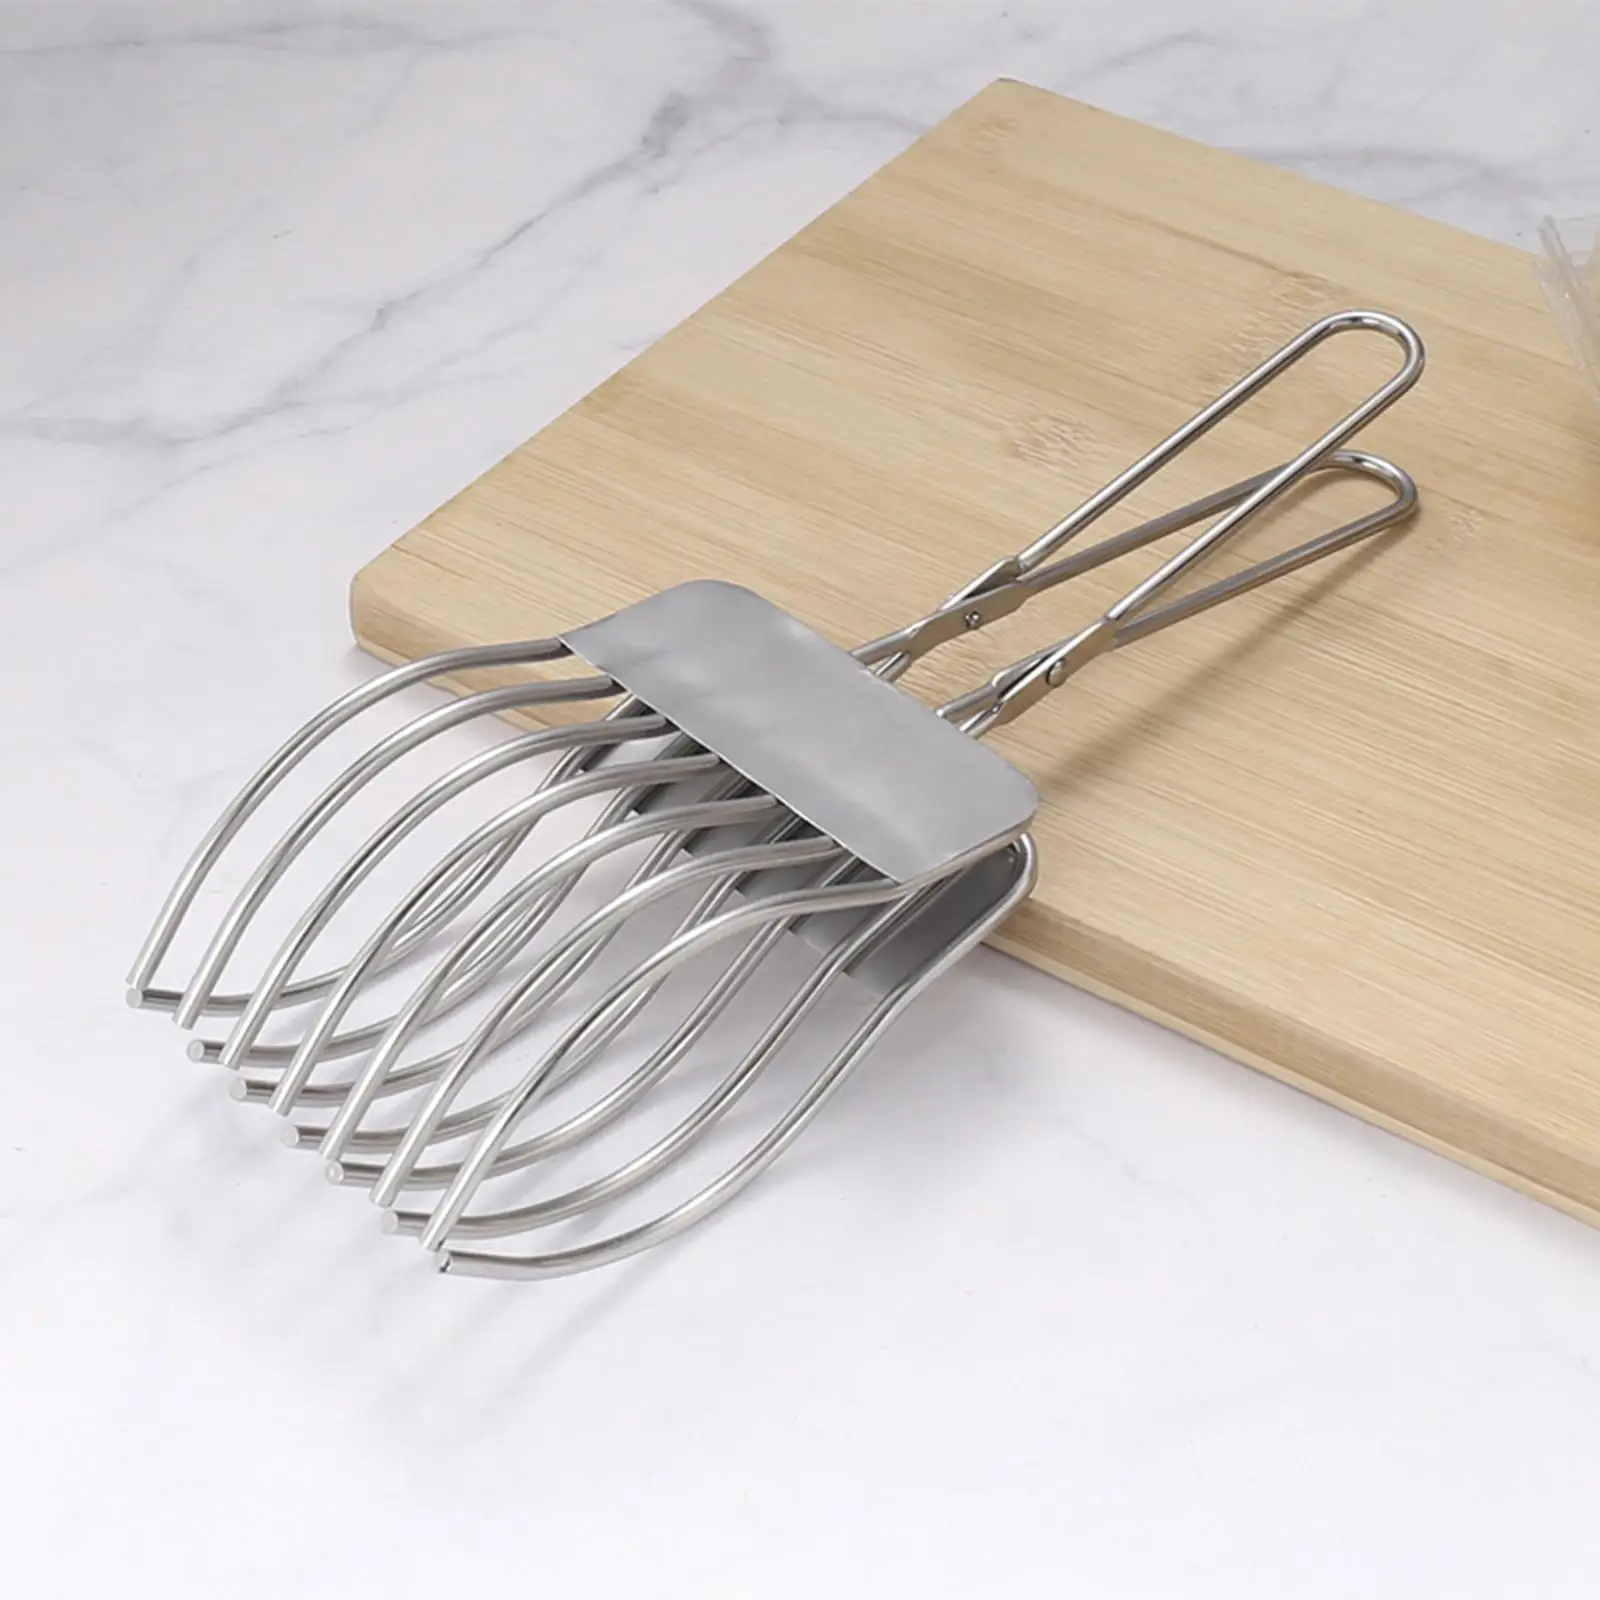 Slicing Kitchen Tongs Food Serving Kitchen Gadgets Roast Beef Tongs for Slicing Vegetable